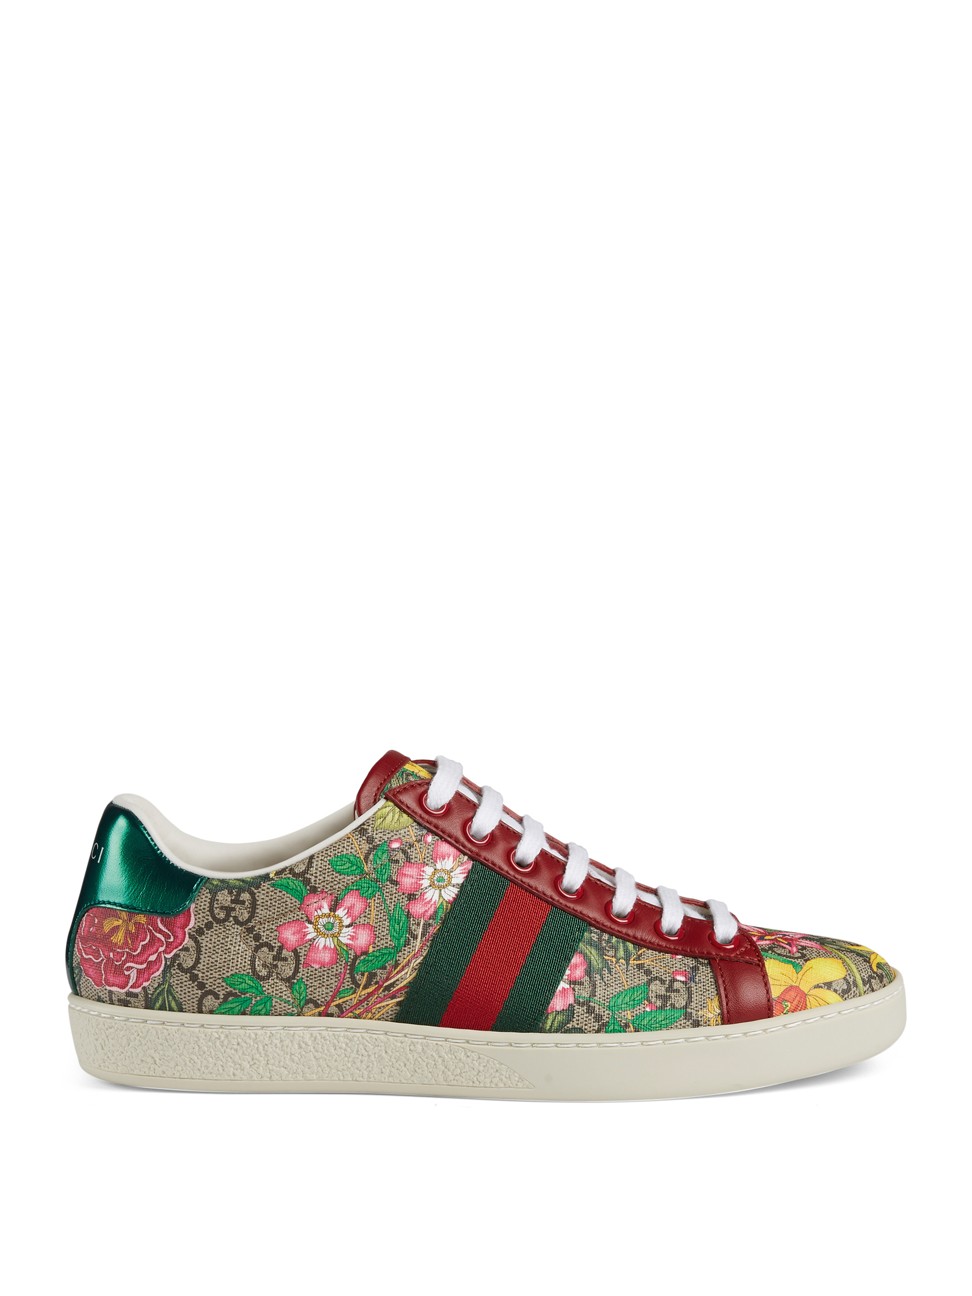 STYLE Edit: Good enough for Grace Kelly – Gucci’s Gift Giving ...